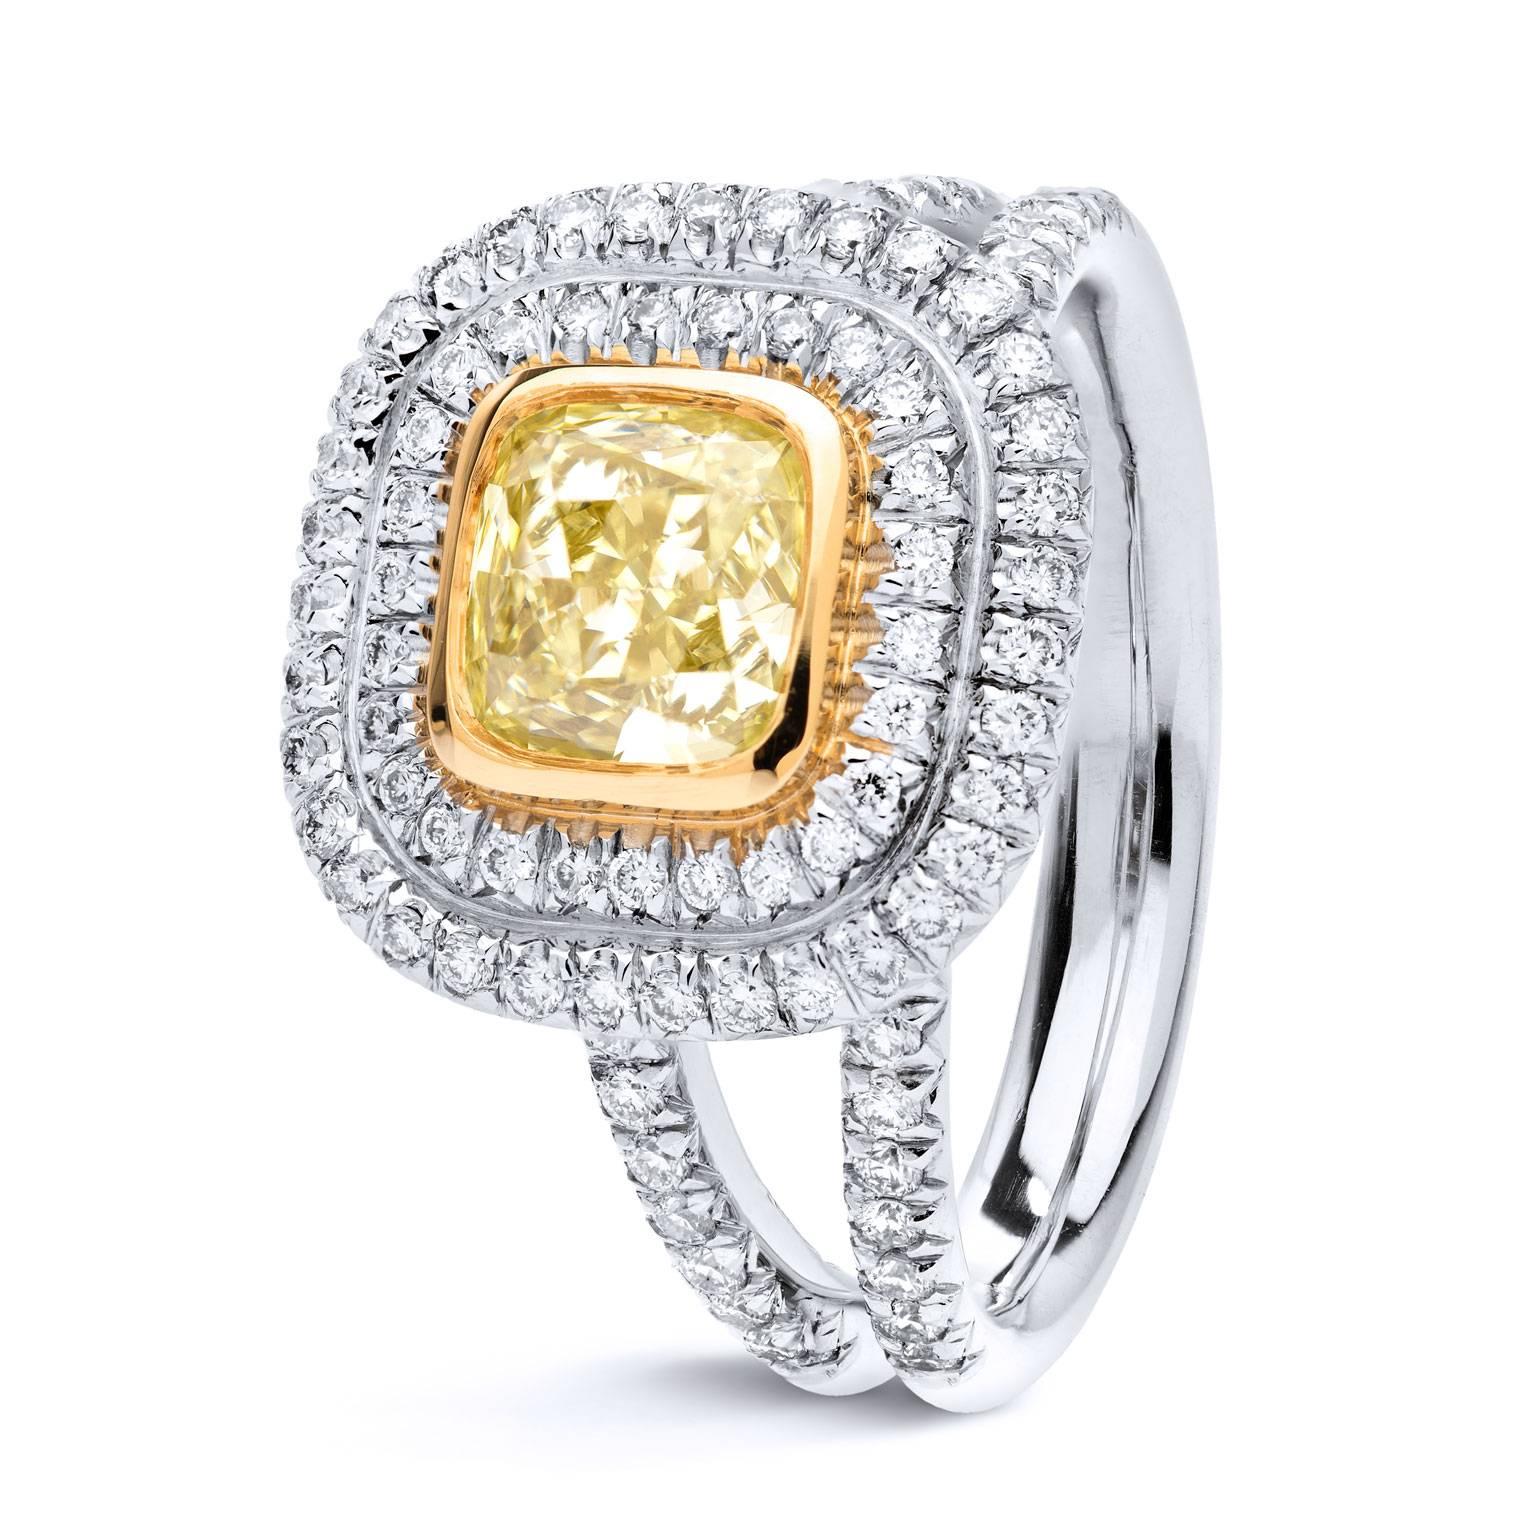  GIA Cert 1.03 Carat Fancy Yellow Cushion Cut Diamond and Pave Diamond Gold Ring

Mimicking a sold-out stadium, two halos of diamond pave circle a 18 karat gold bezel-set 1.03 carat natural fancy cushion-cut VS2 yellow diamond. Certified by the GIA,